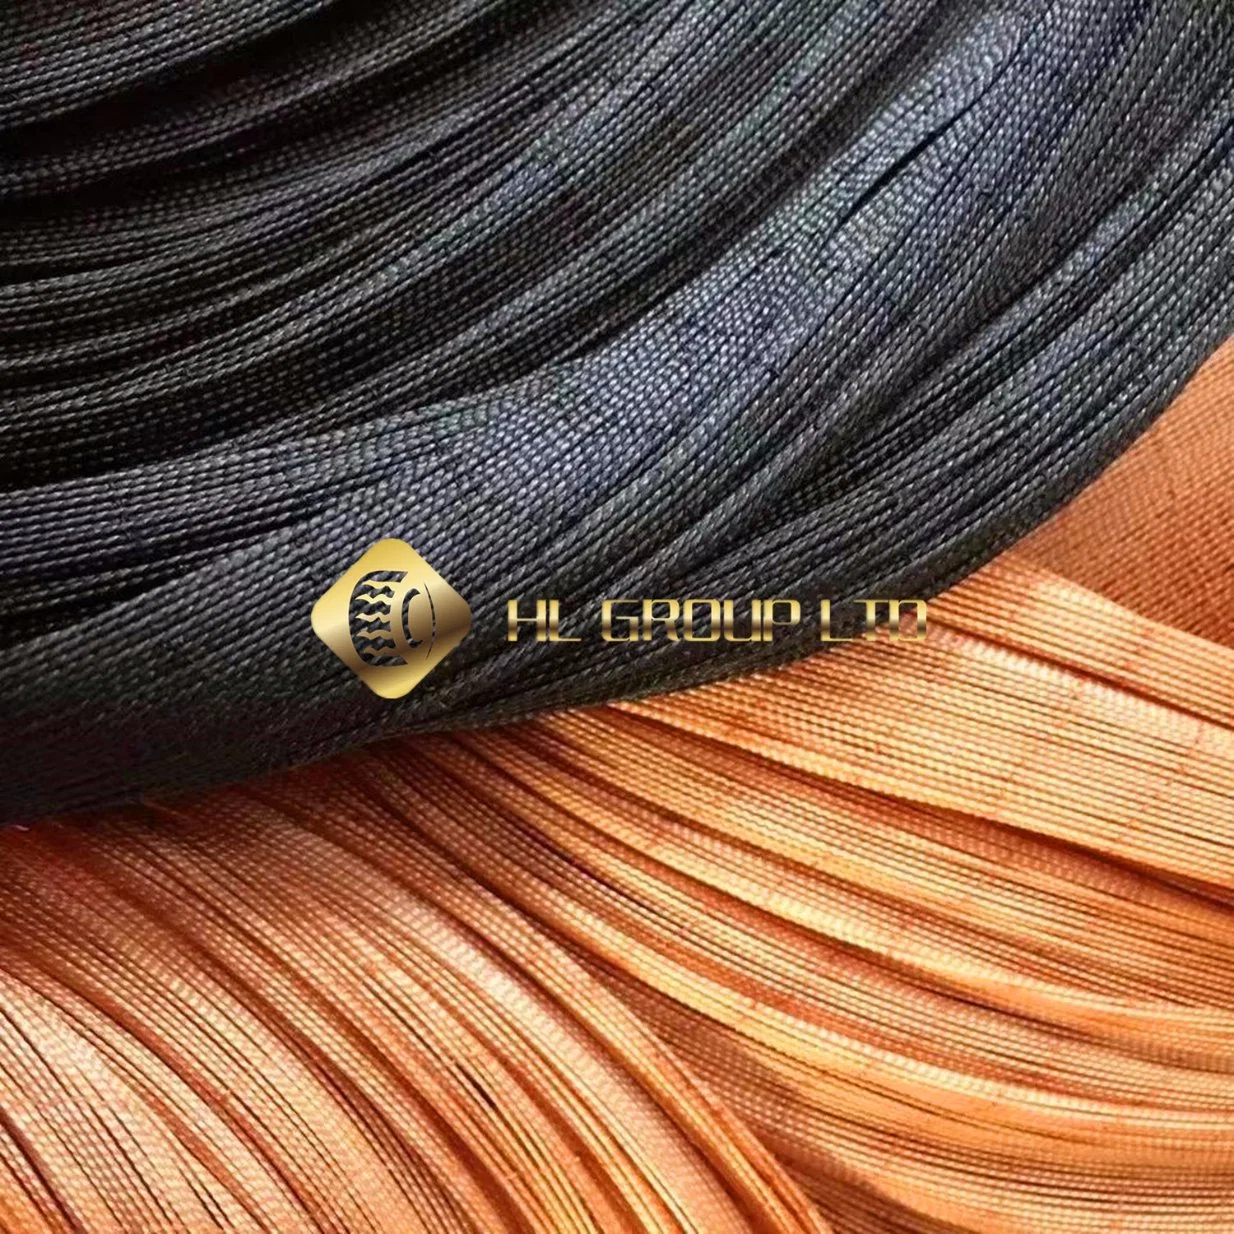 Tire Cord Fabrics of High Tenacity Yarn of Polyester Dipped, Secondary Quality for Making Fishing Net Packed in Rolls